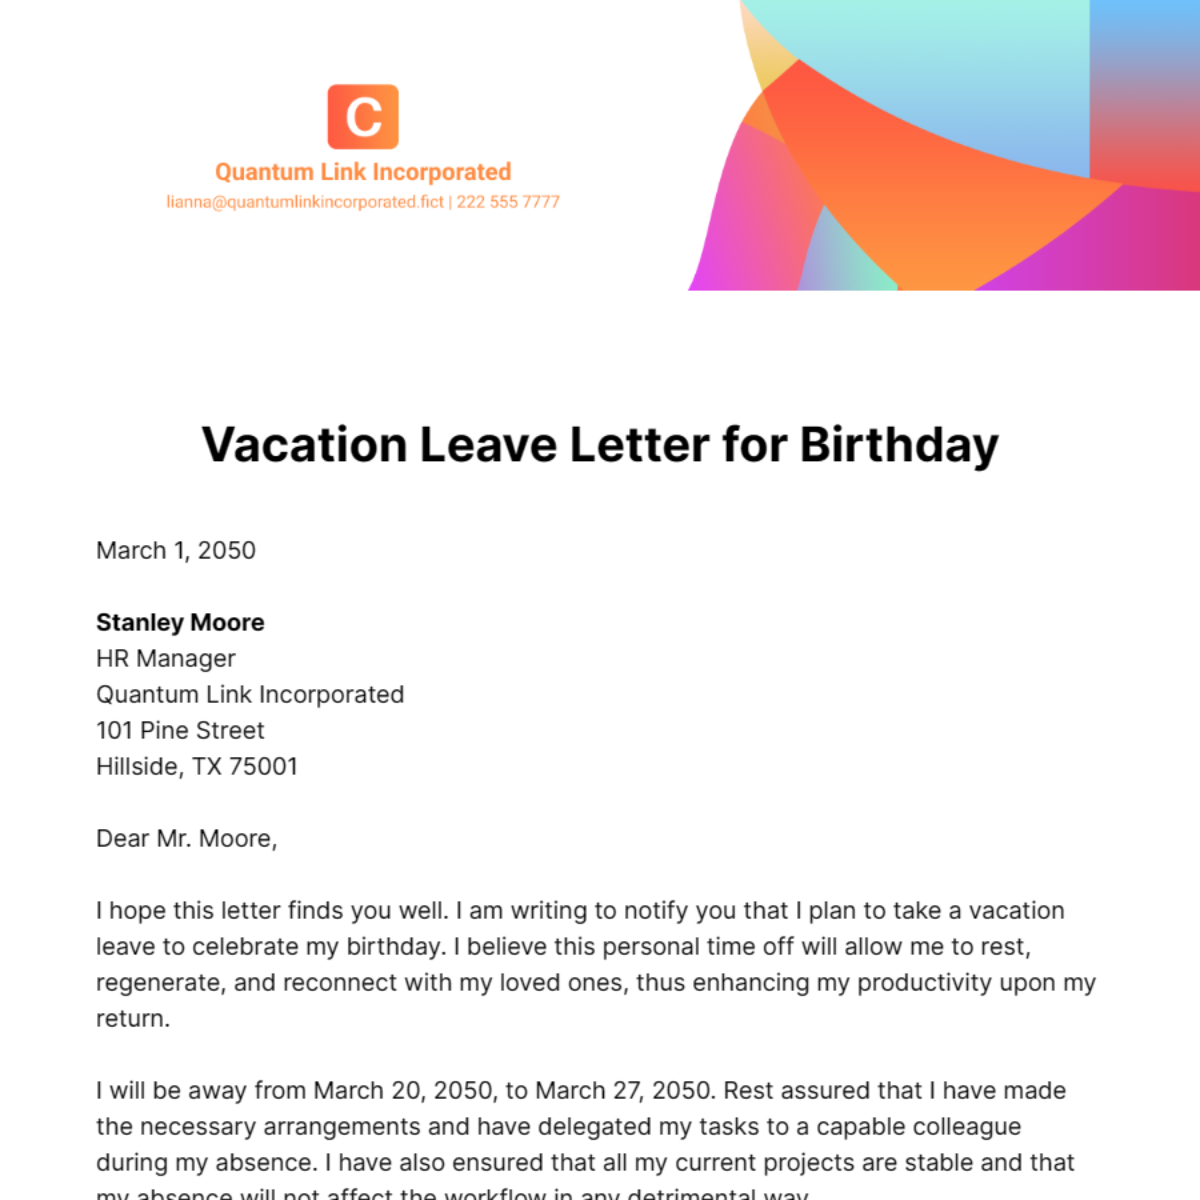 Vacation Leave Letter for Birthday Template